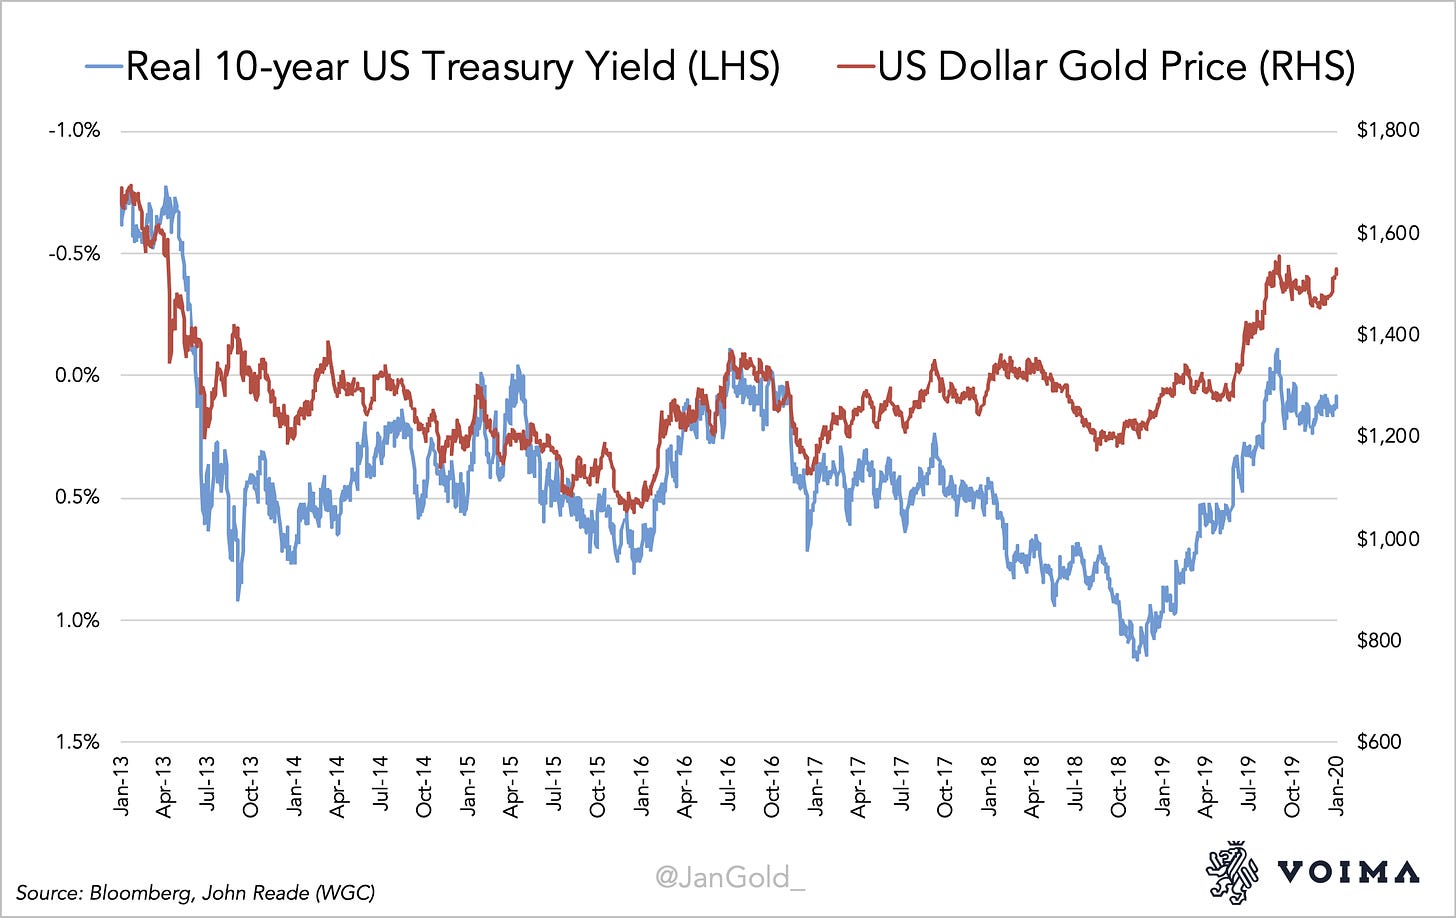 Real Interest Rates and US Dollar Gold Price 